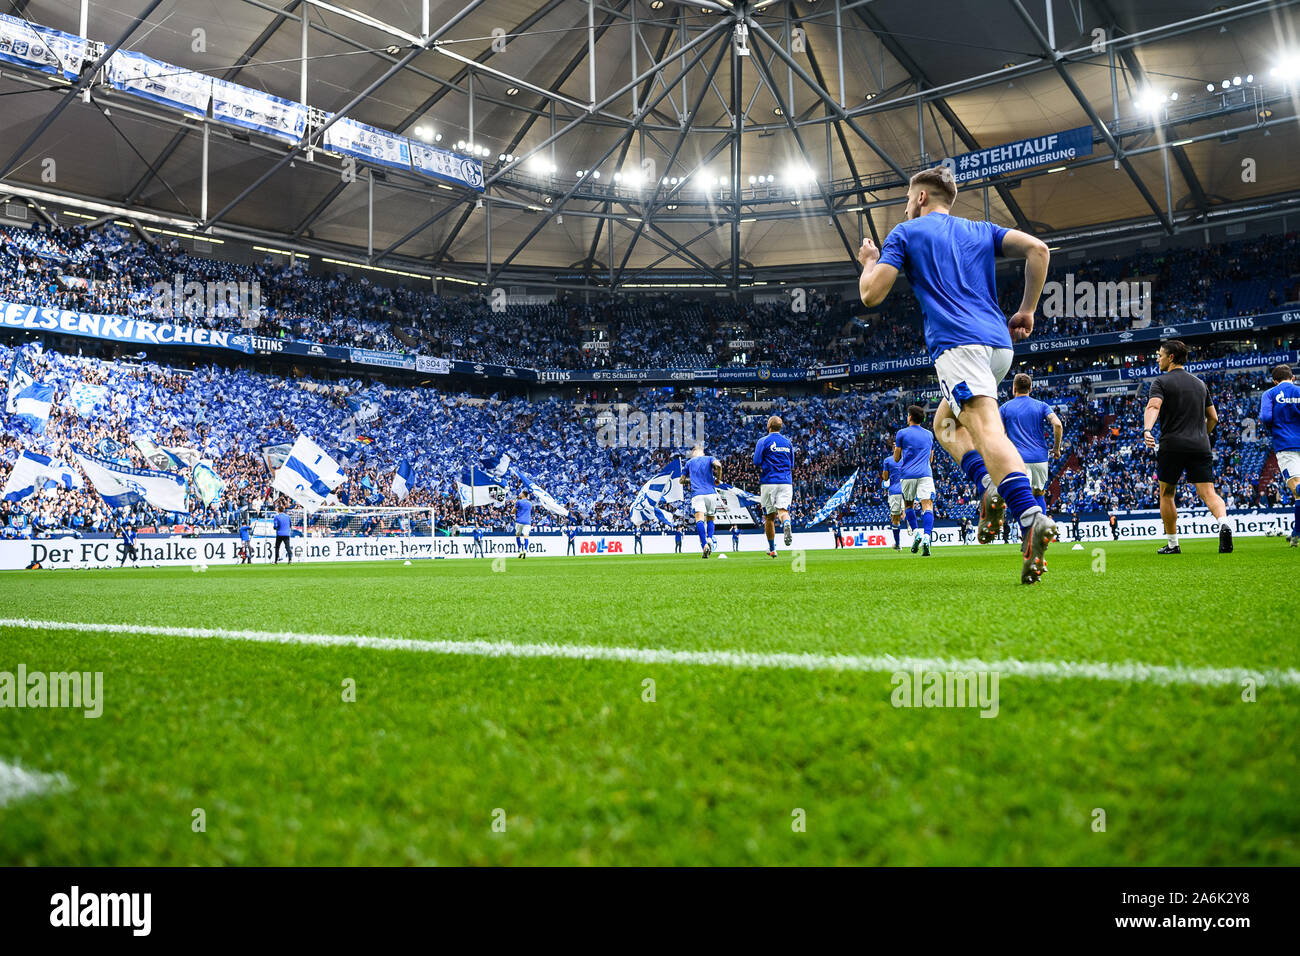 Schalke players come to the field to warm up. GES/Soccer/1. Bundesliga: FC Schalke 04 - Borussia Dortmund, 26.10.2019 - Football/Soccer 1st Division: FC Schalke 04 vs. Borussia Dortmund, Gelsenkirchen, Oct 26, 2019 - DFL regulations prohibit any use of photographs as image sequences and/or quasi-video. | usage worldwide Stock Photo